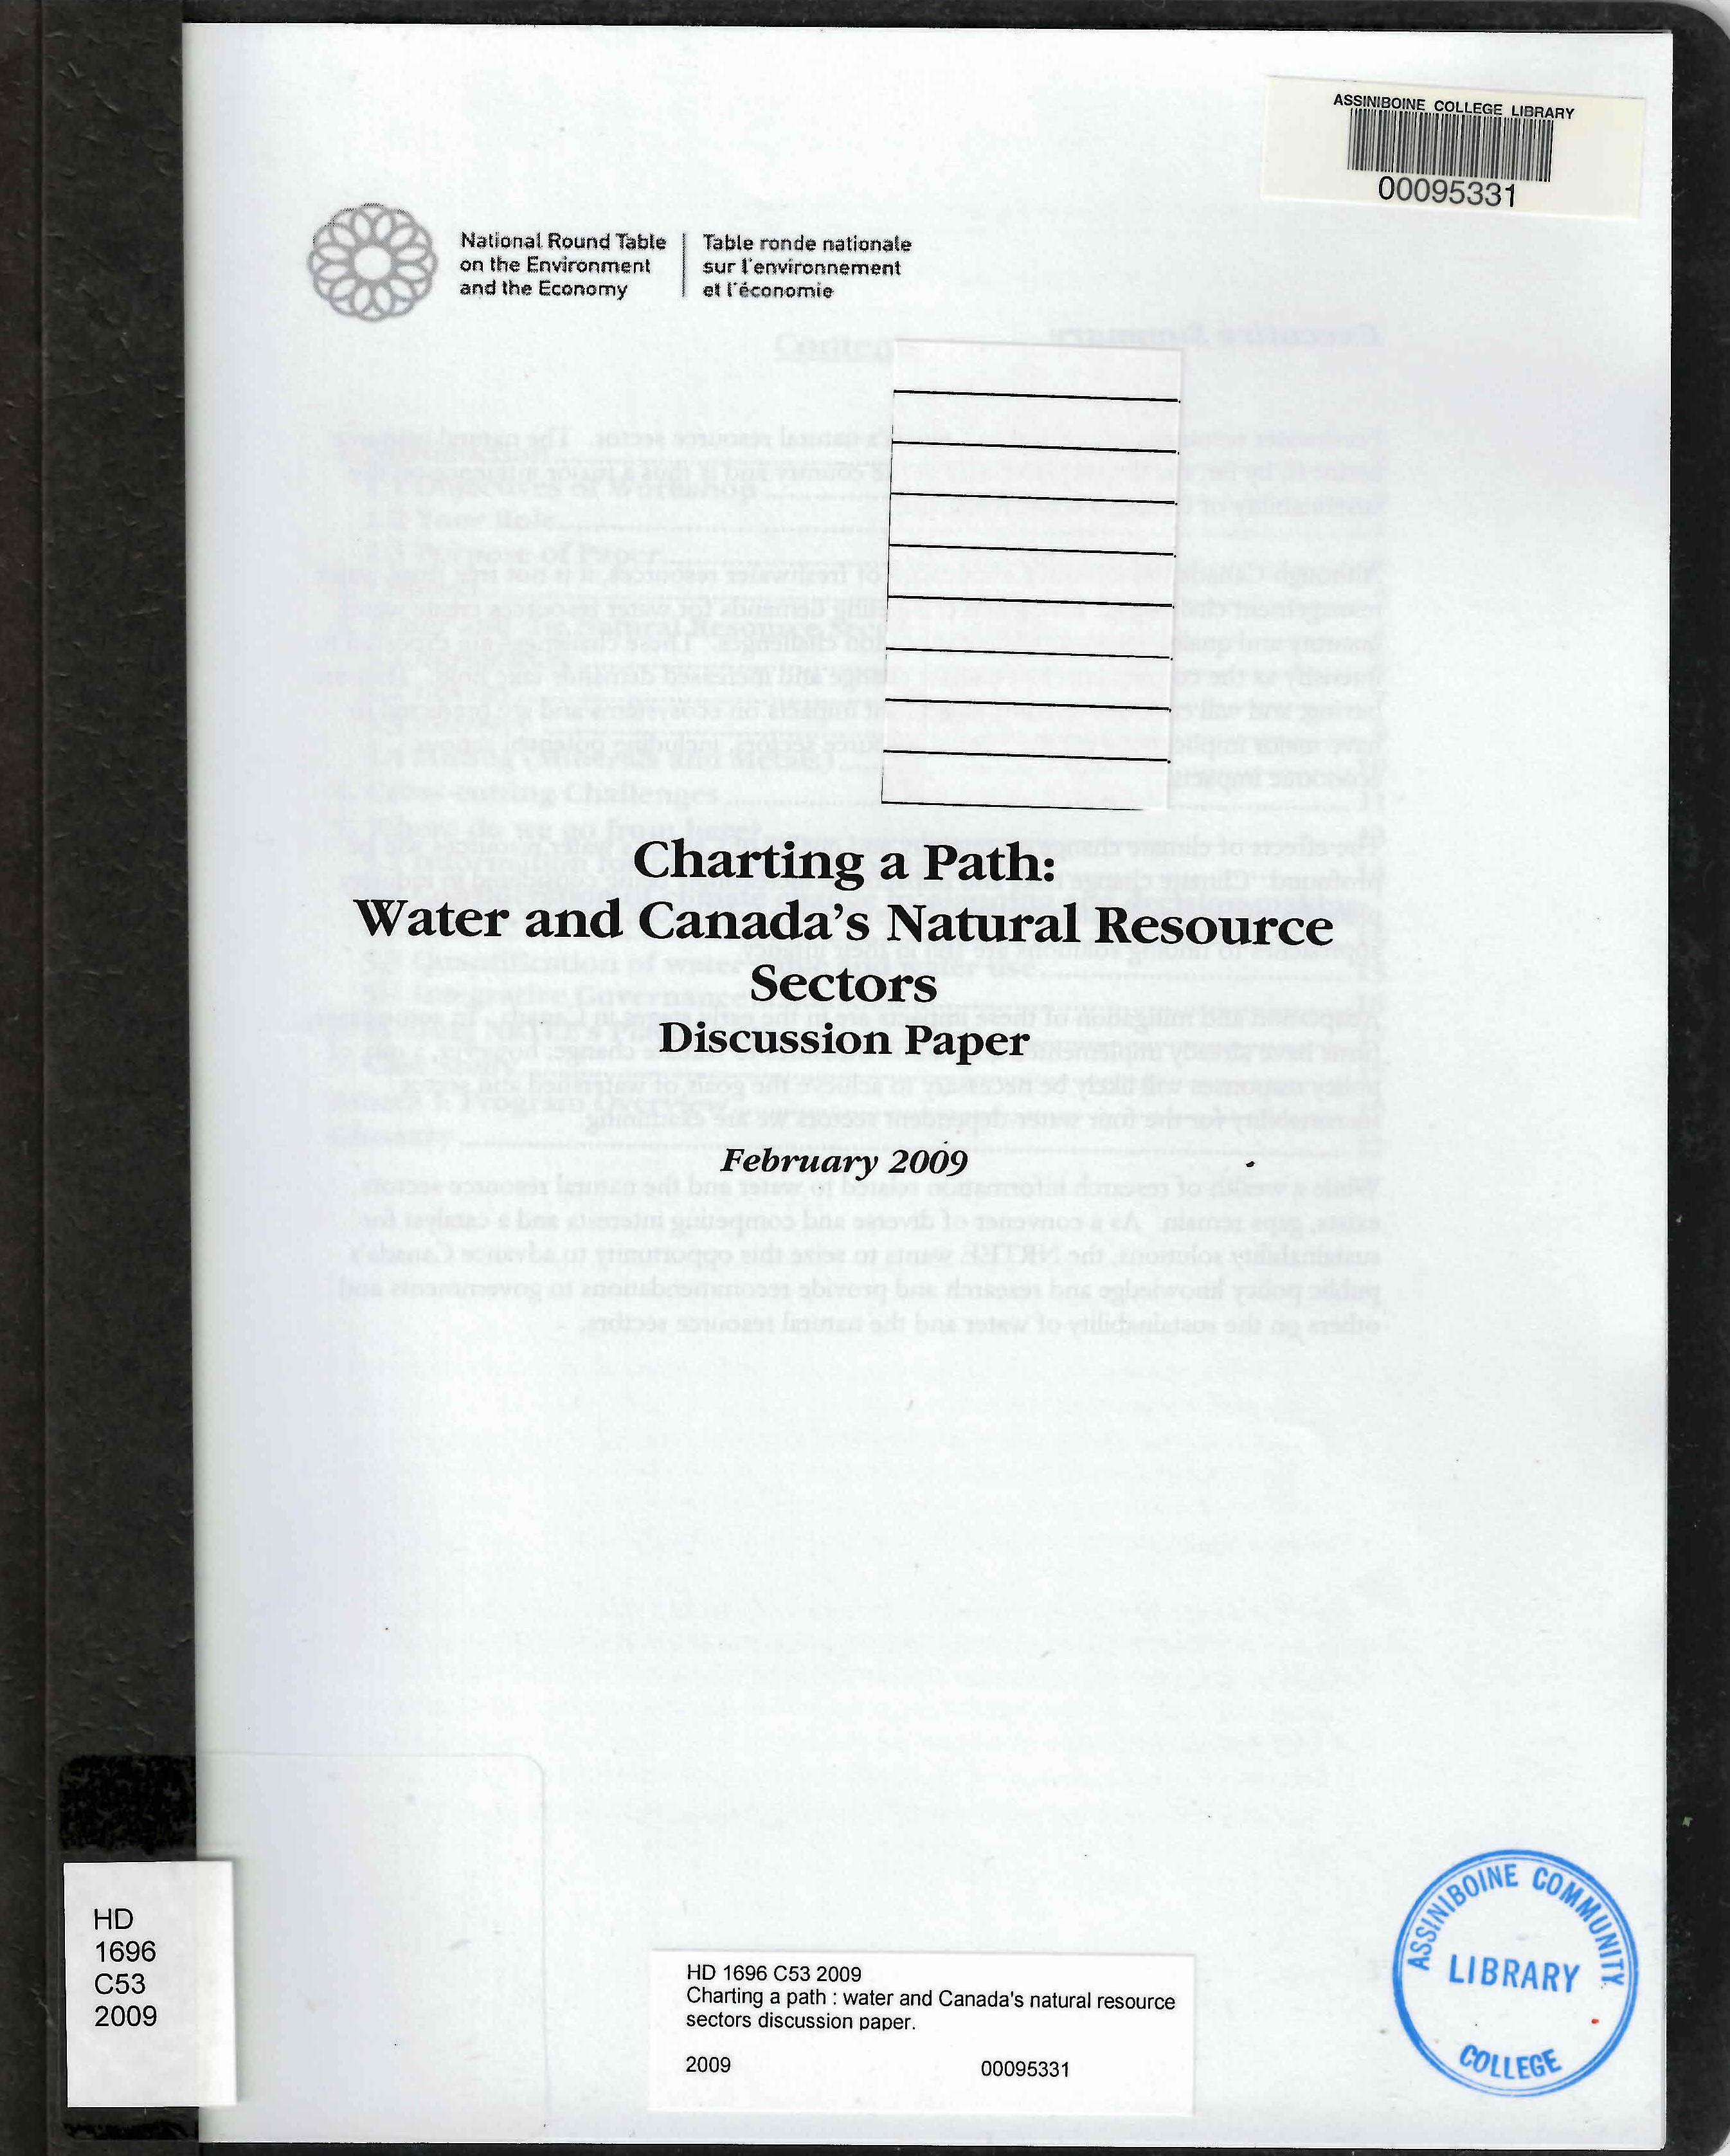 Charting a path : water and Canada's natural resource sectors discussion paper